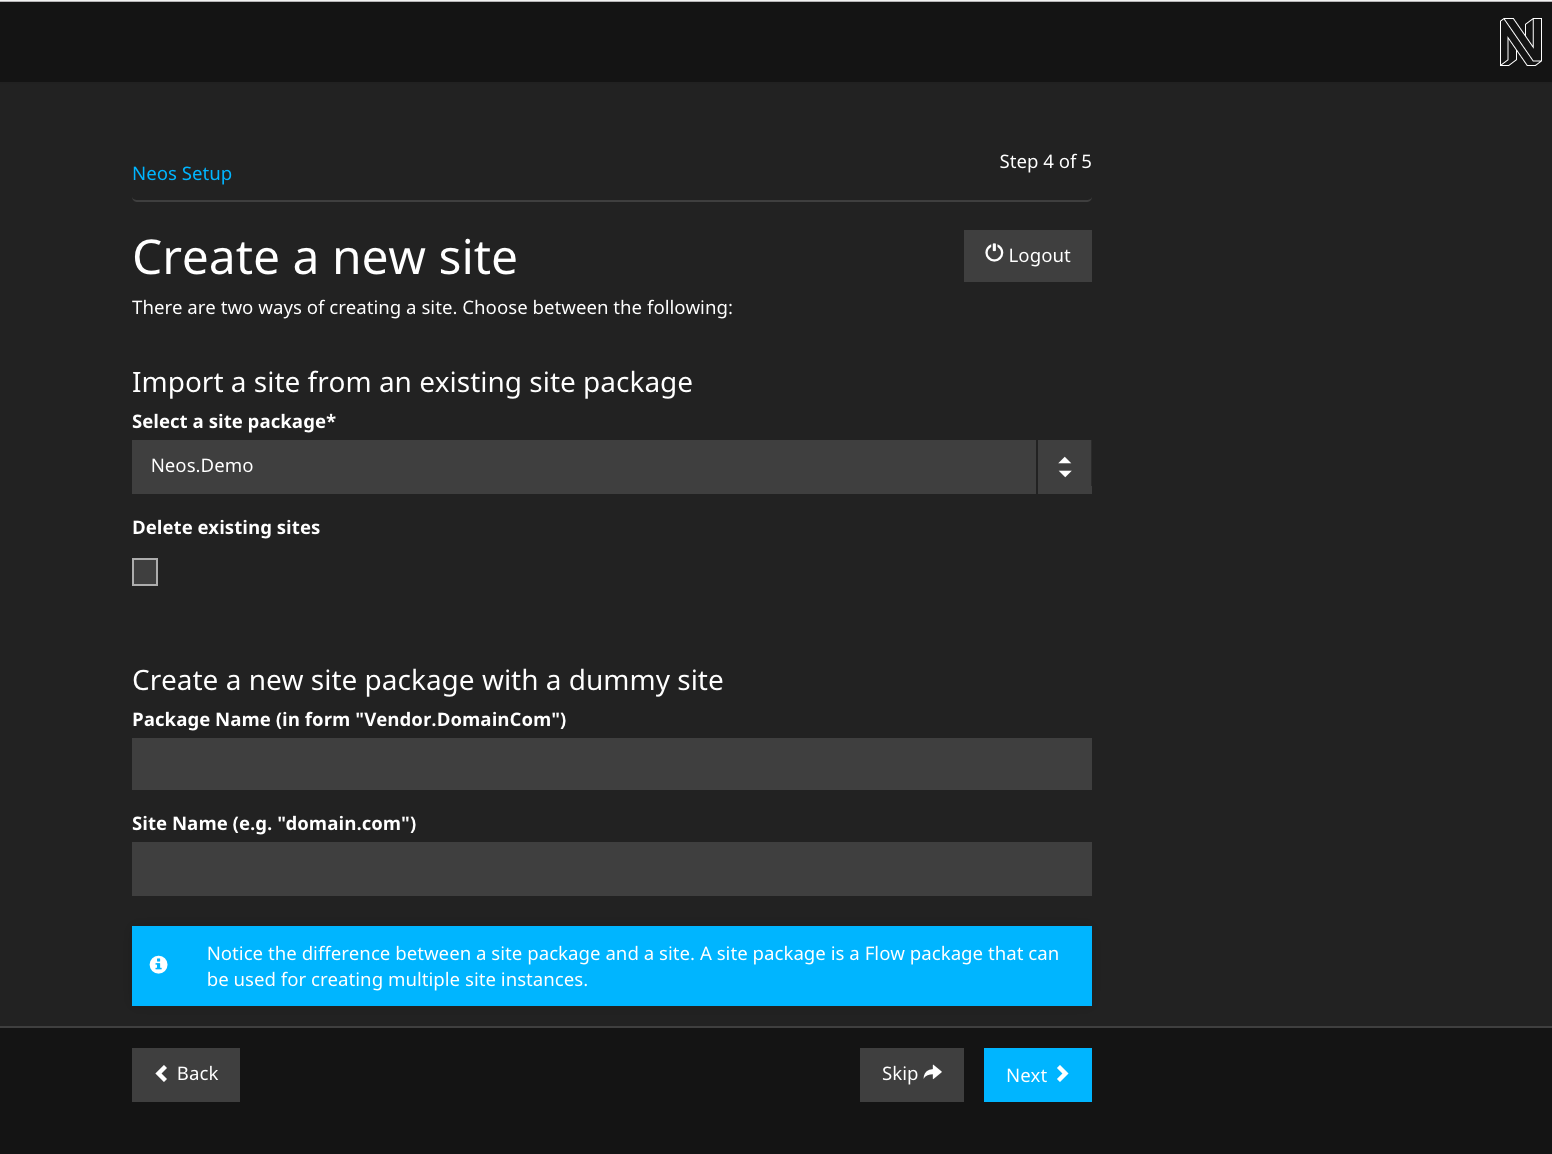 Create new site or import an existing